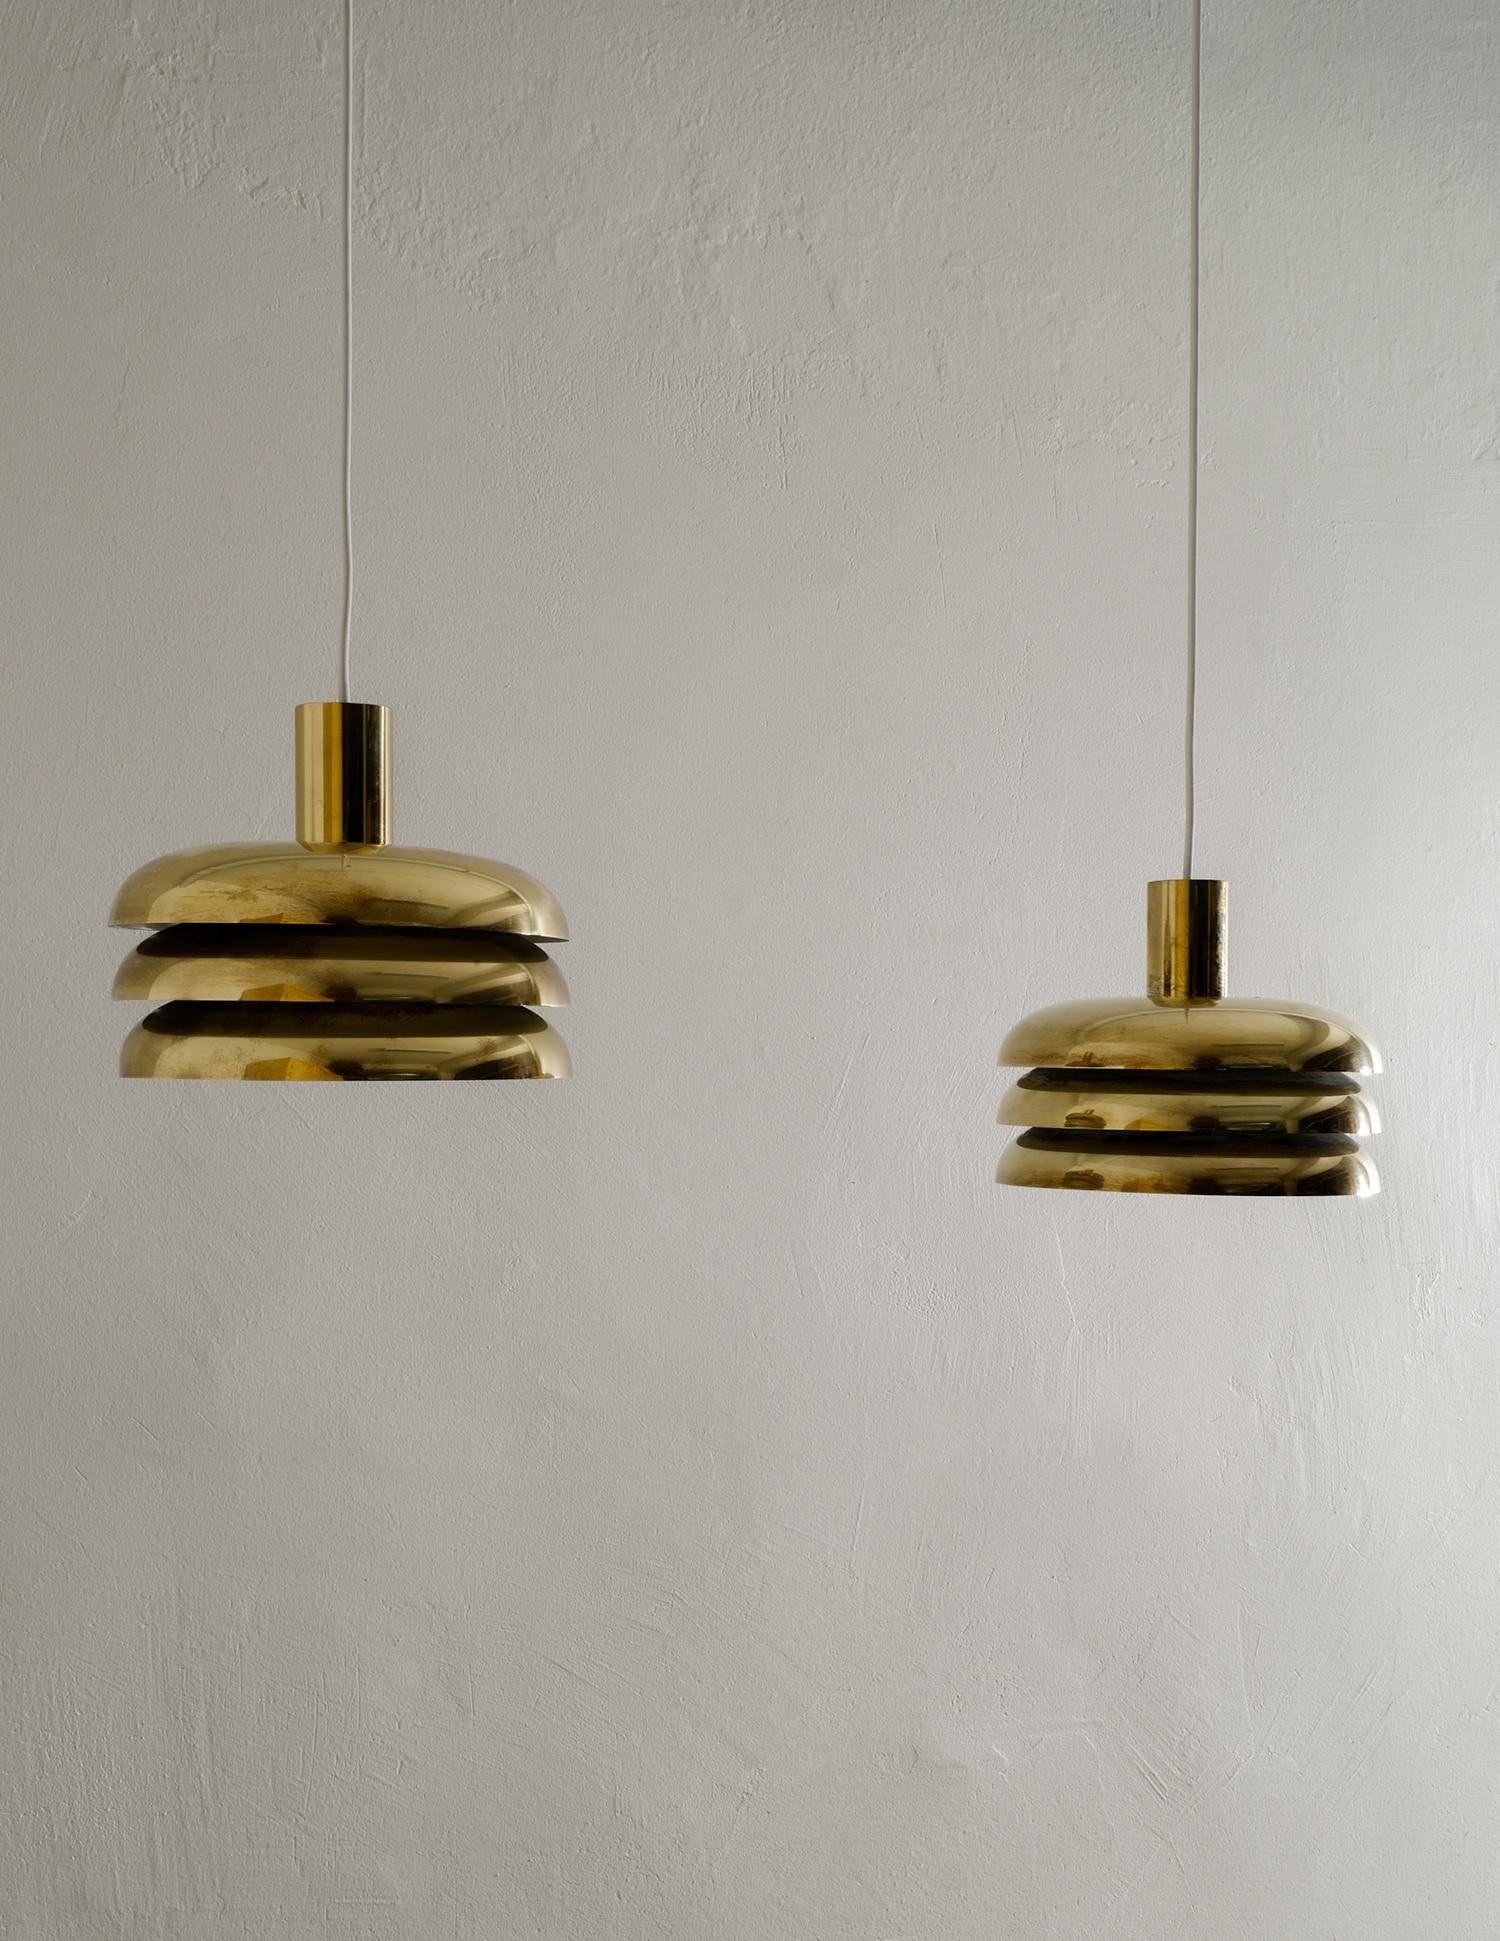 Swedish Pair of Midcentury Brass Pendants by Hans-Agne Jakobsson Produced in Sweden